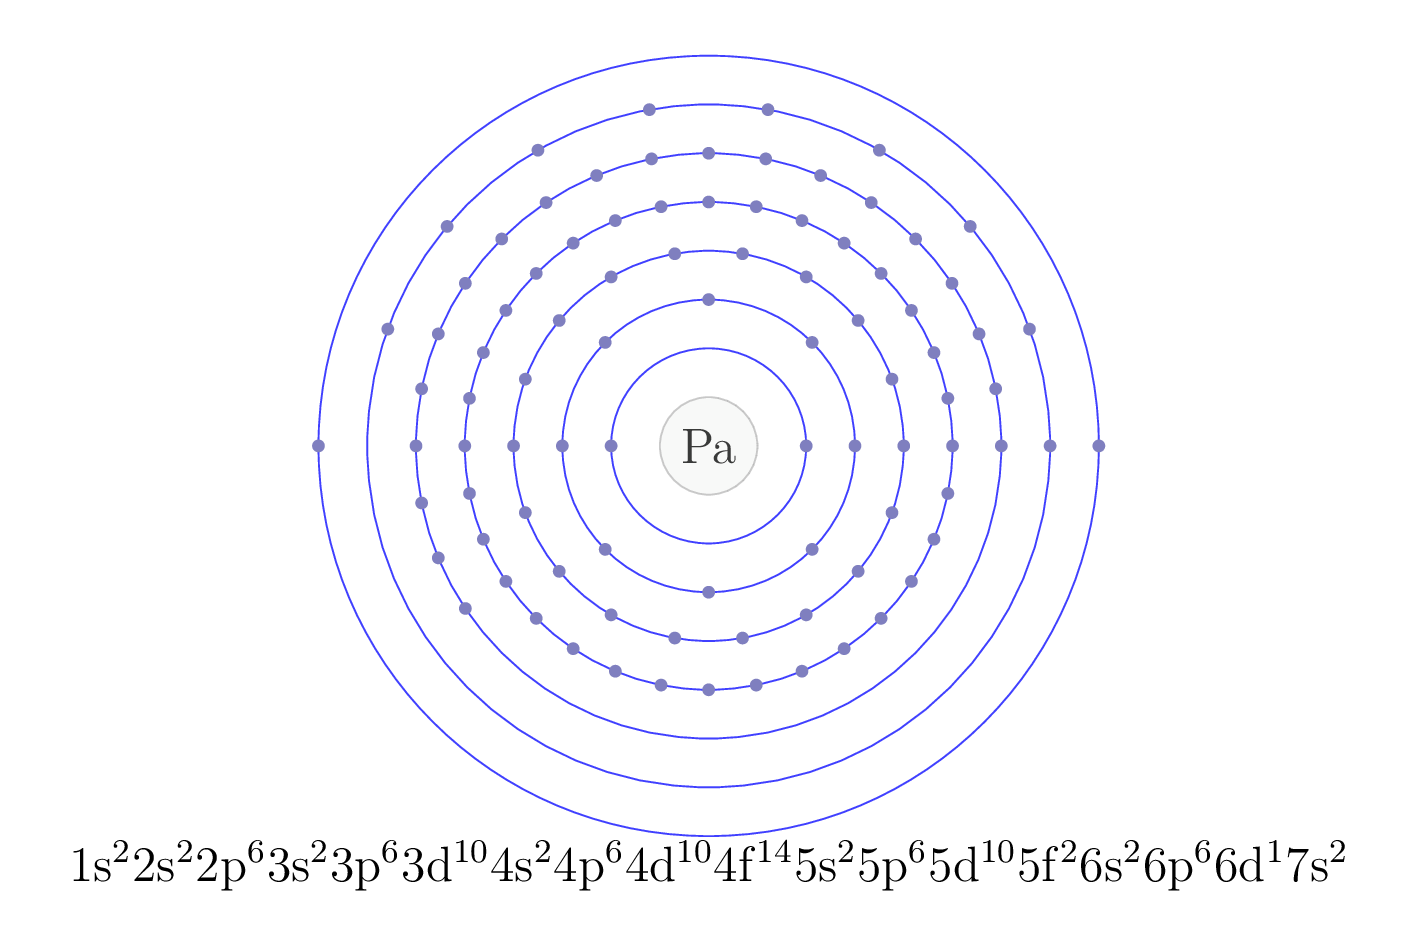 electron configuration of element Pa